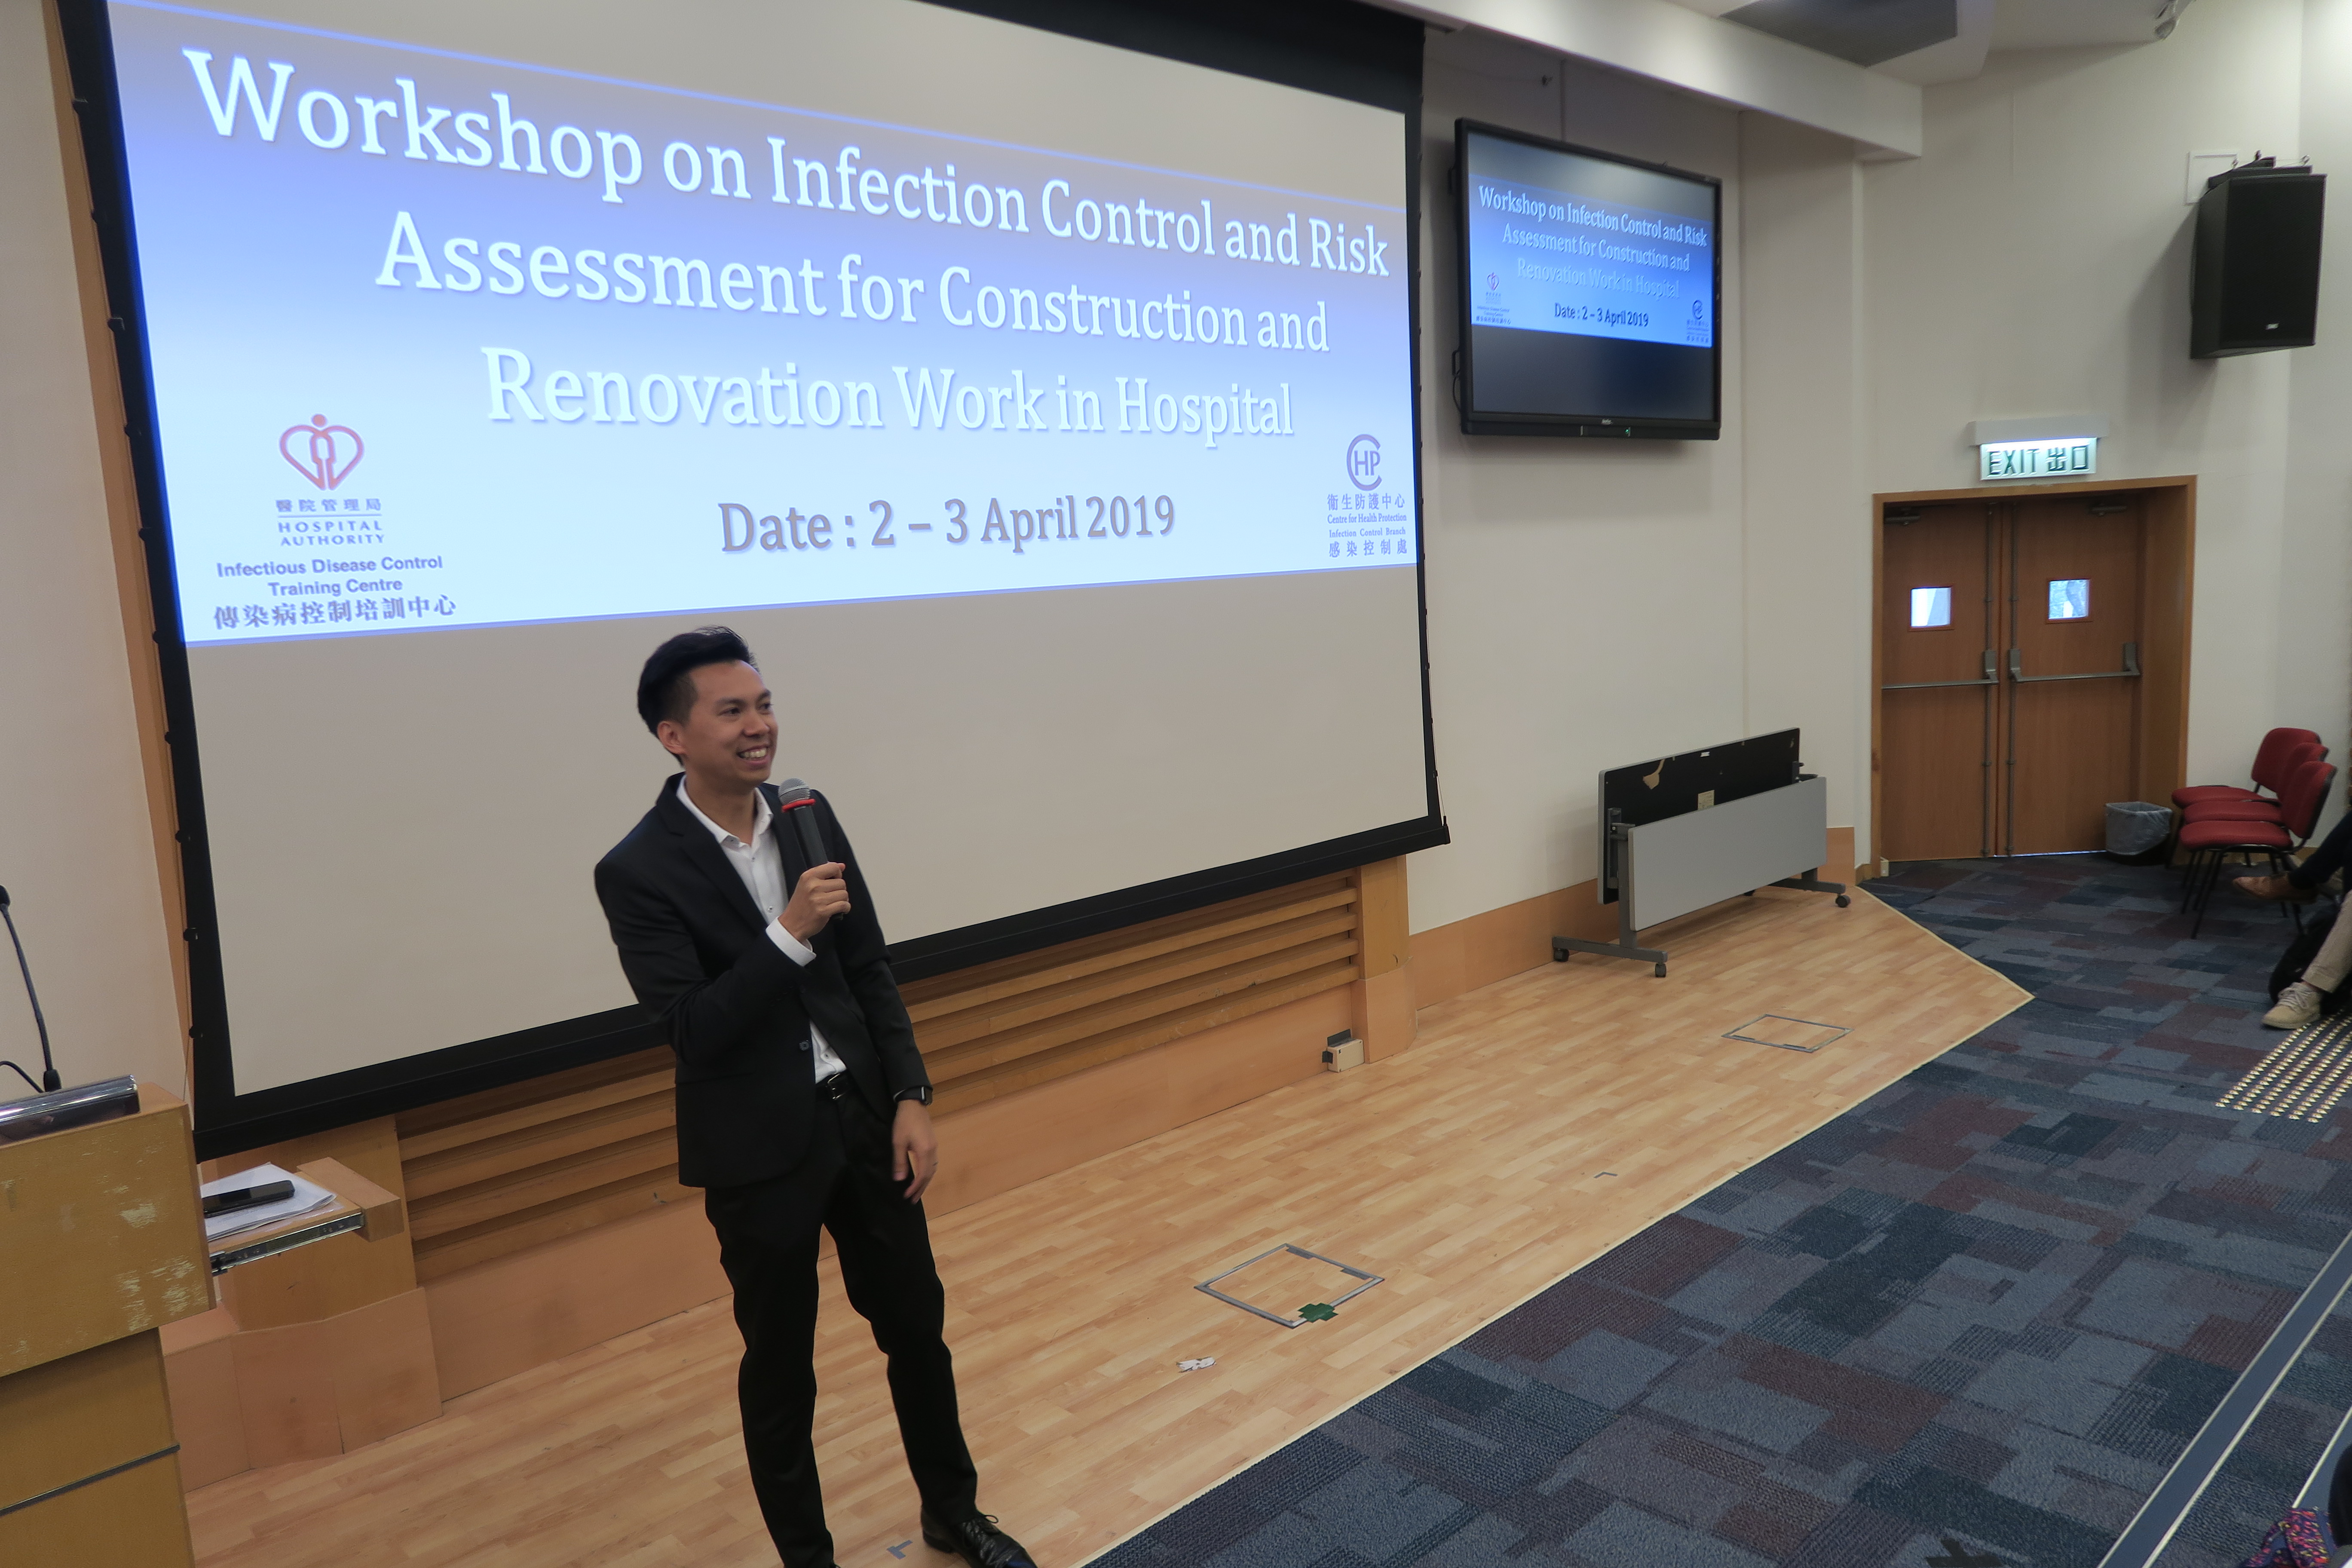 Workshop on Infection Control and Risk Assessment for Construction and Renovation Work in Hospital thumbnail